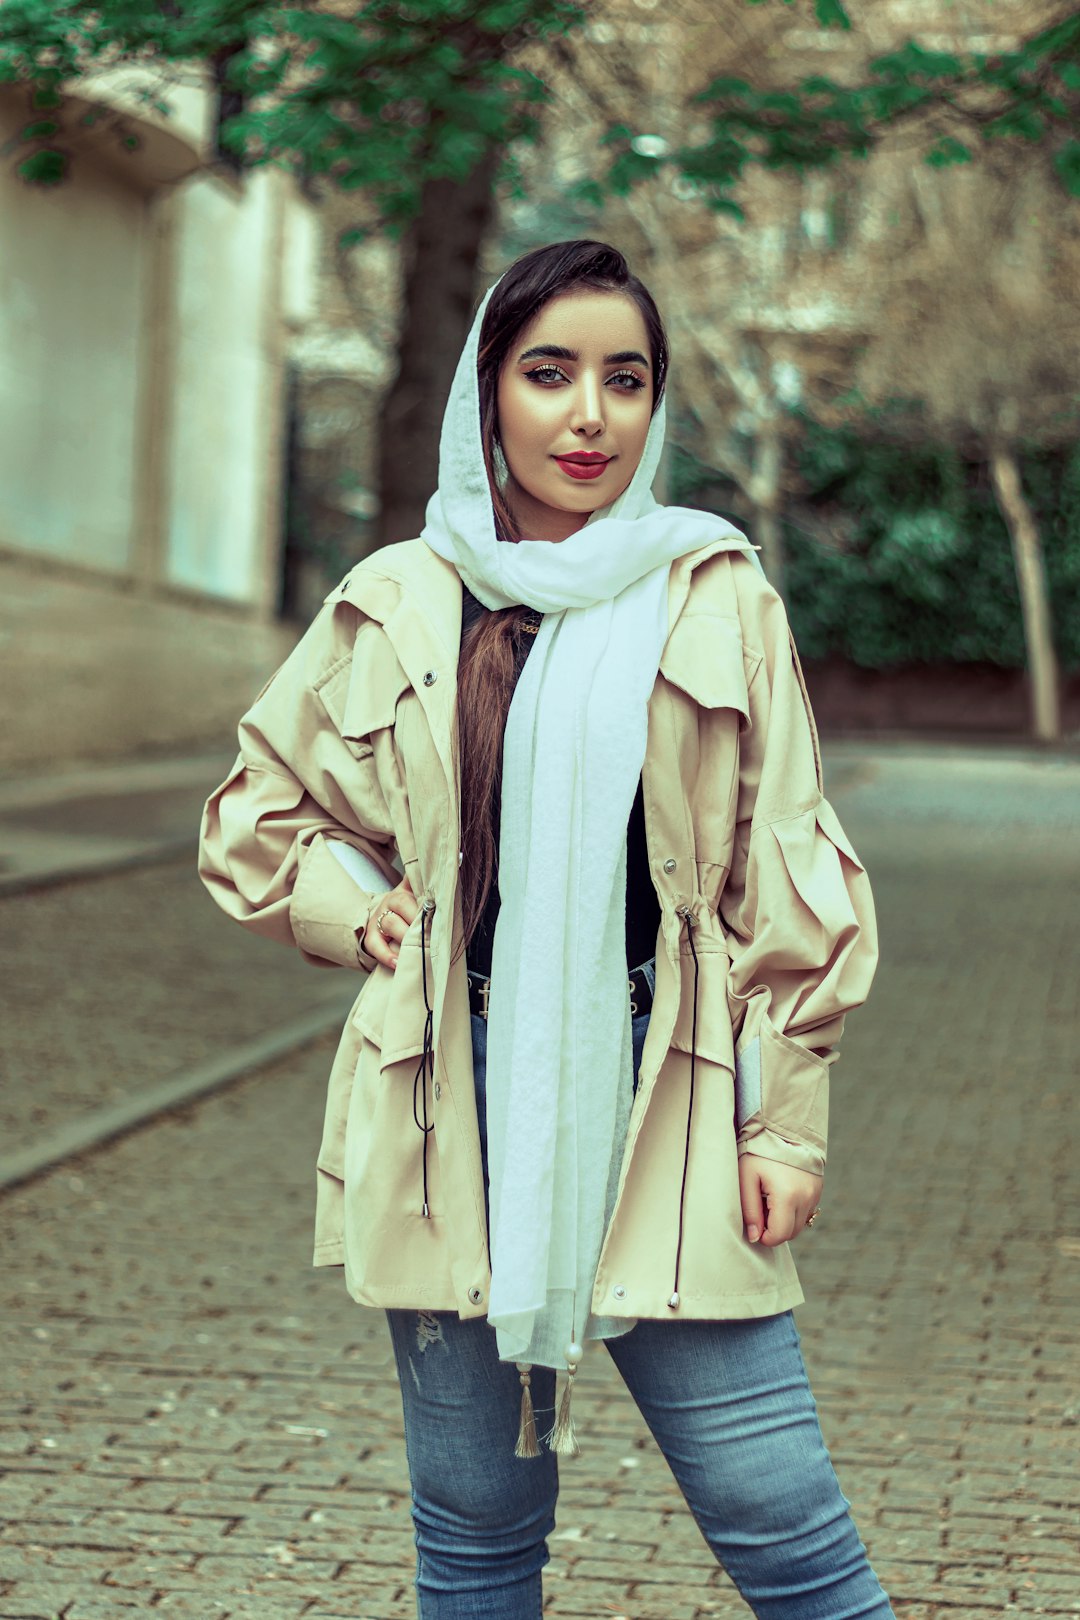 woman in brown coat standing on brown concrete pathway during daytime